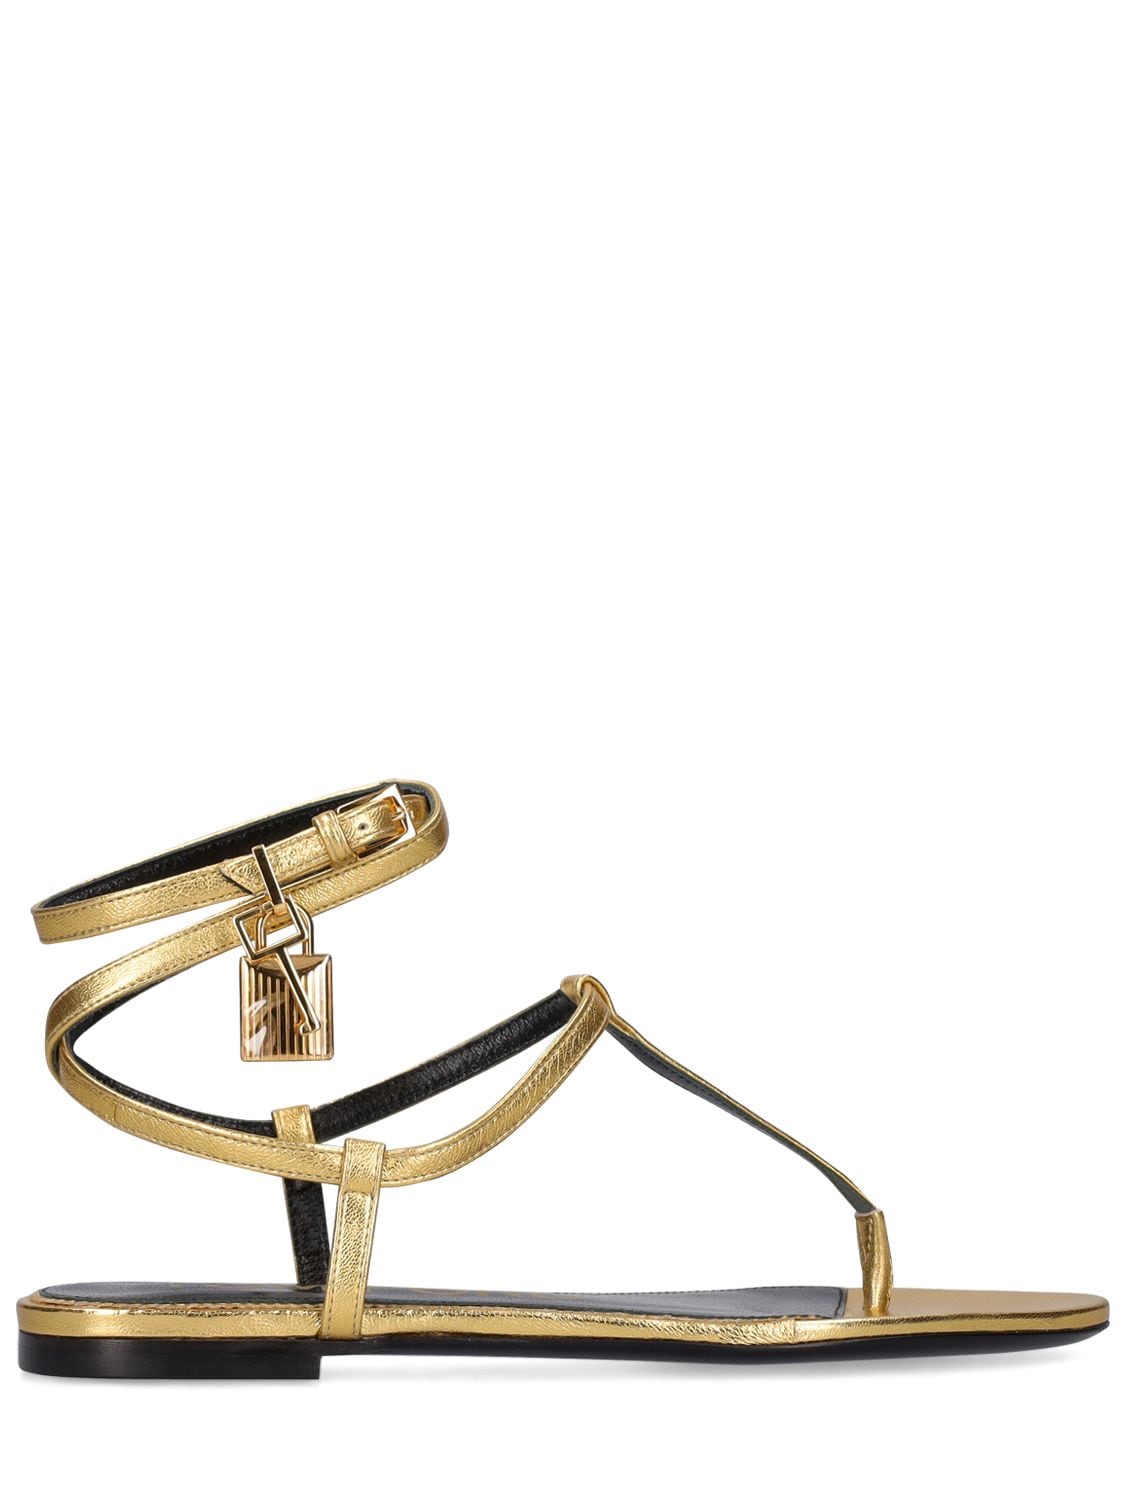 Mm Laminated Leather Thong Sandals - TOM FORD - Modalova